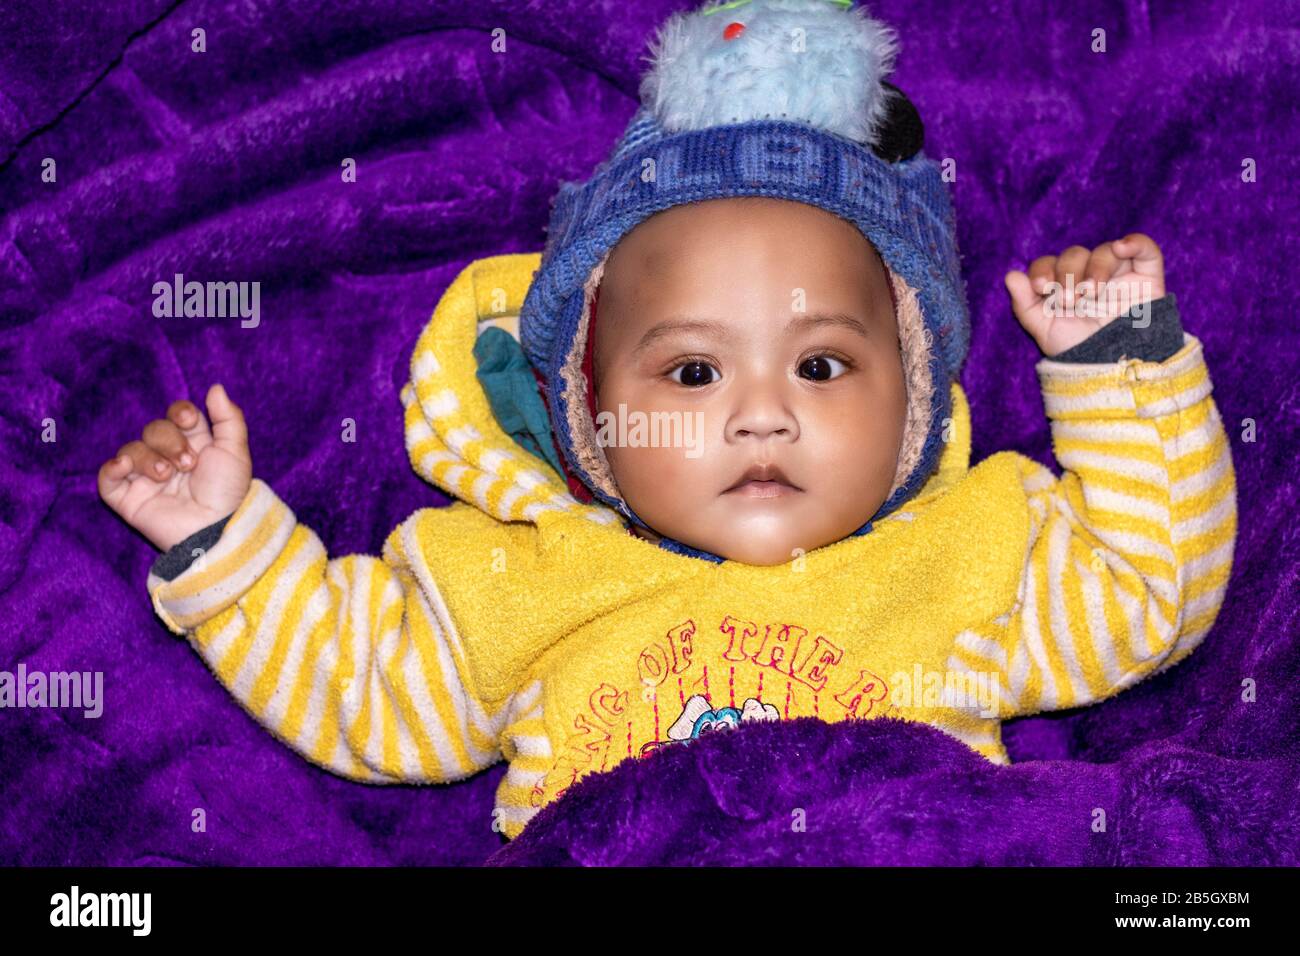 Newborn indian baby close-up on voilet blanket background looking at camera Stock Photo